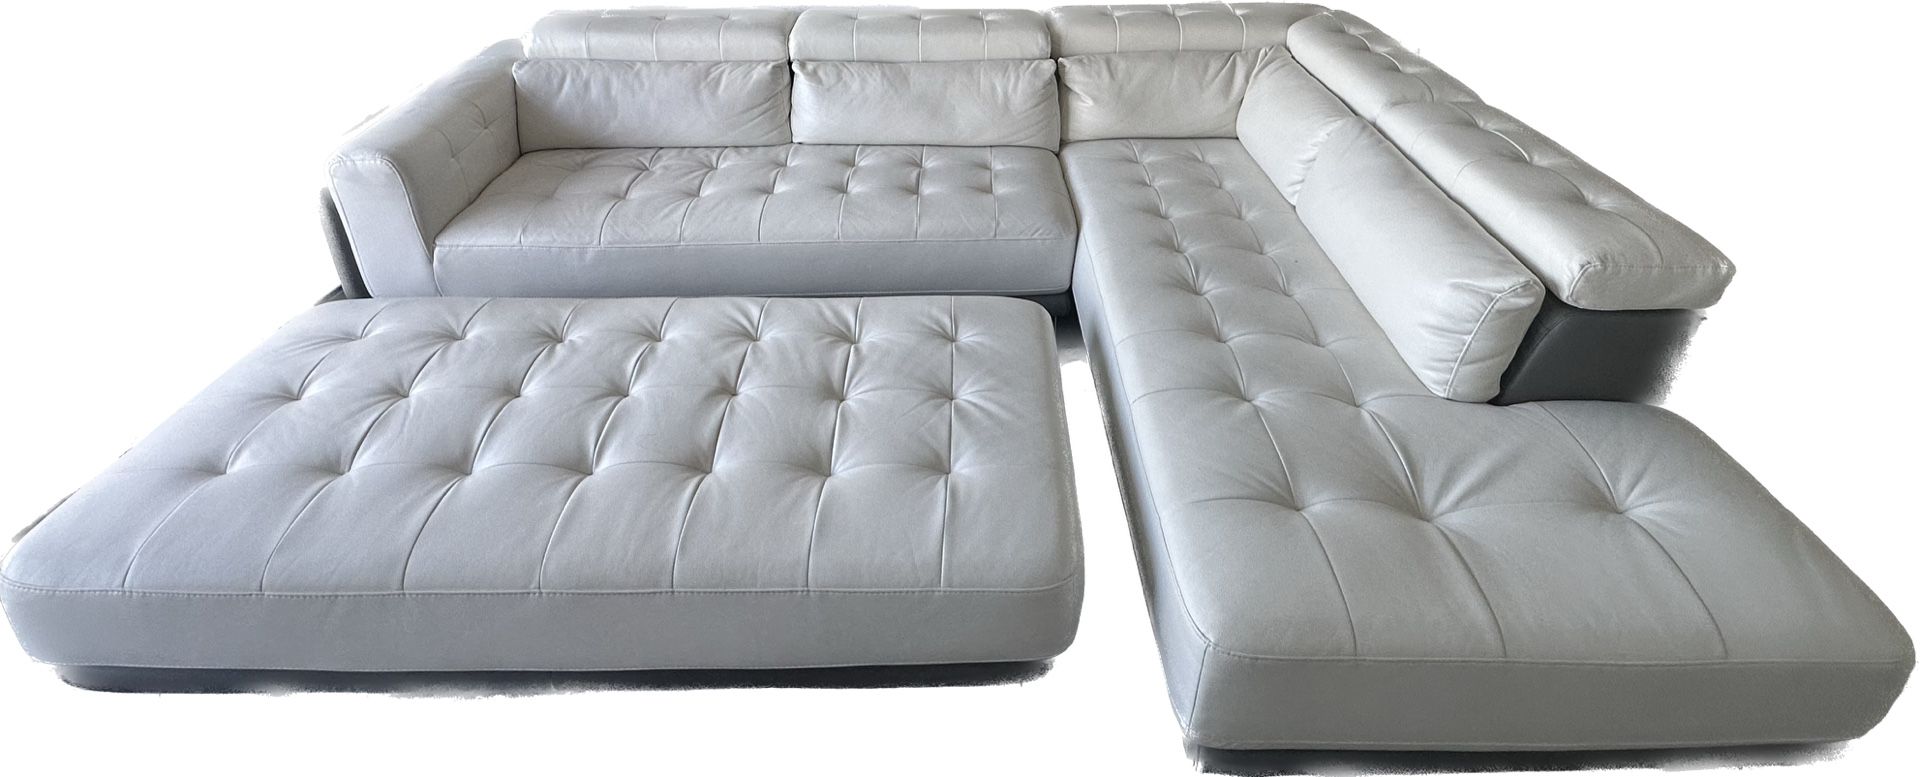 Faux leather White & Gray Sectional with ottoman, end table and lamp